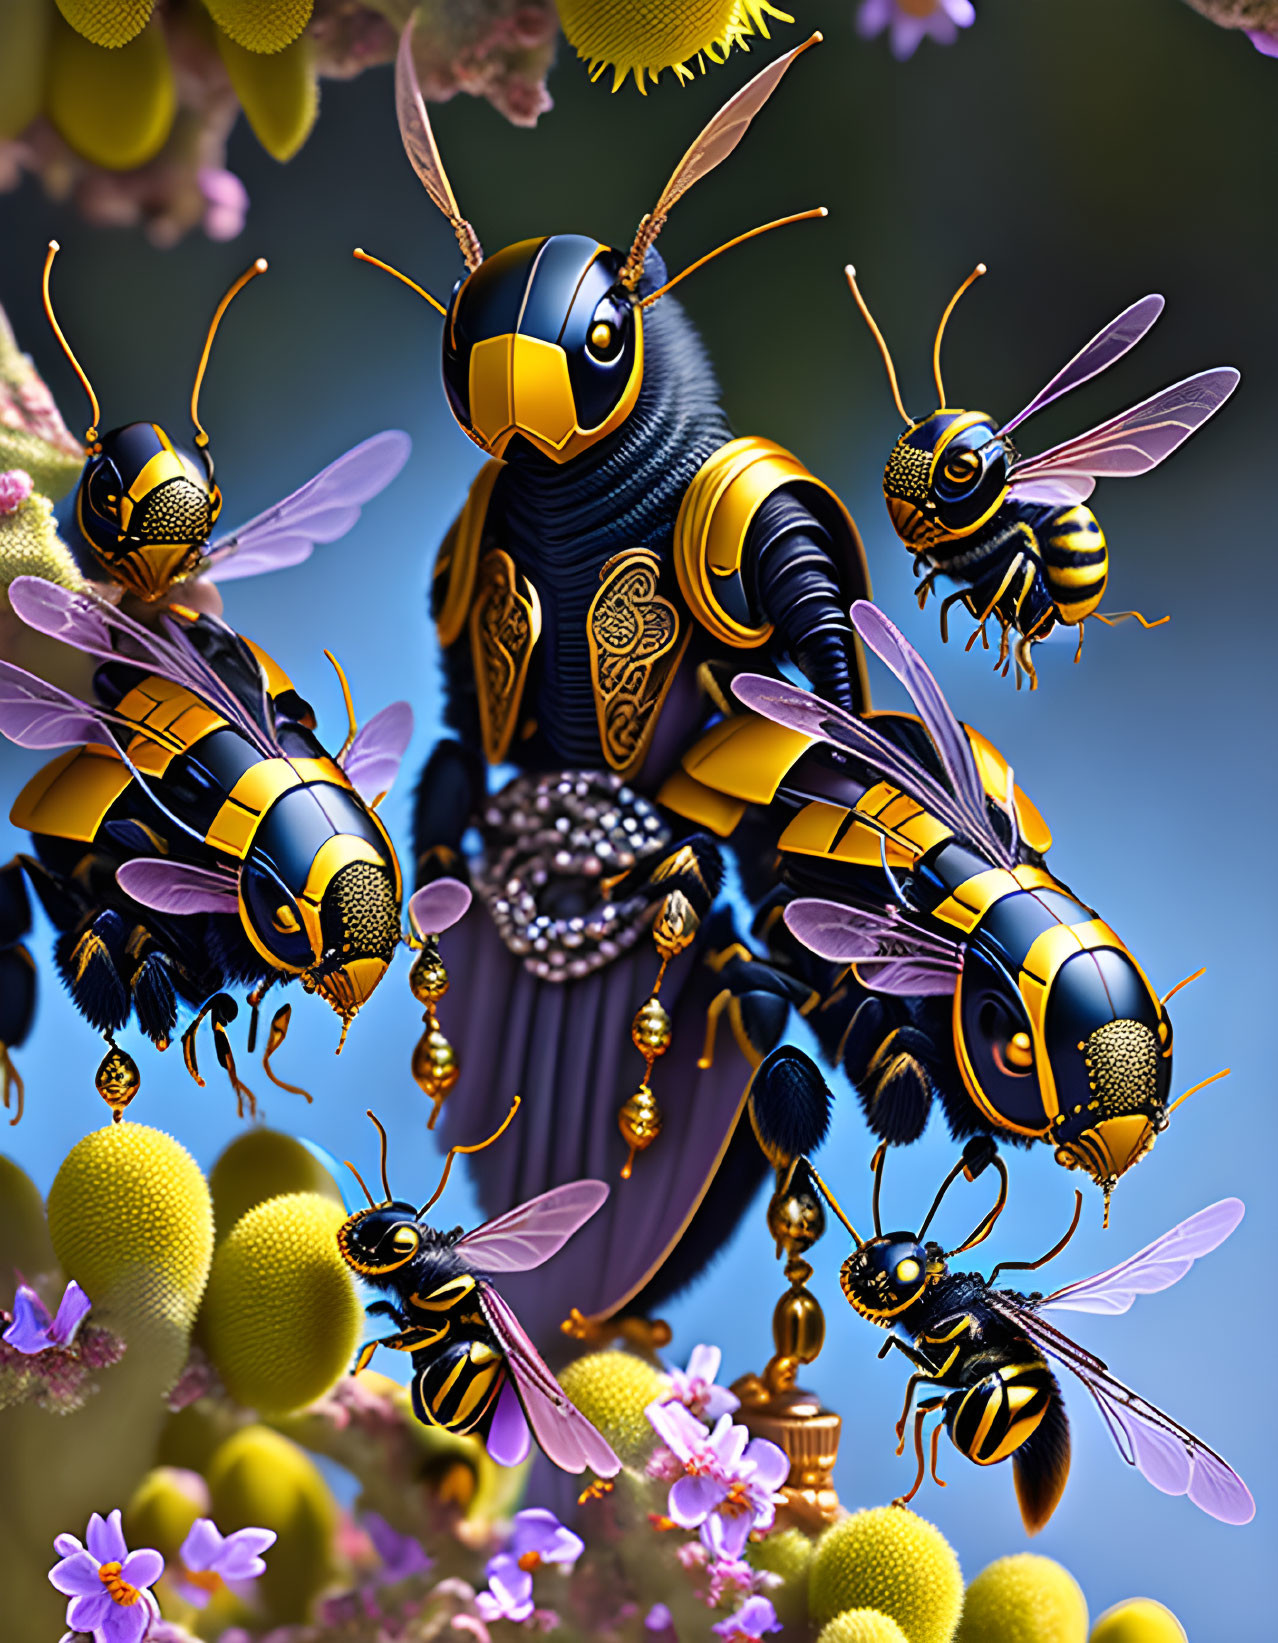 Stylized digital bees with golden patterns flying around yellow flowers on blue background